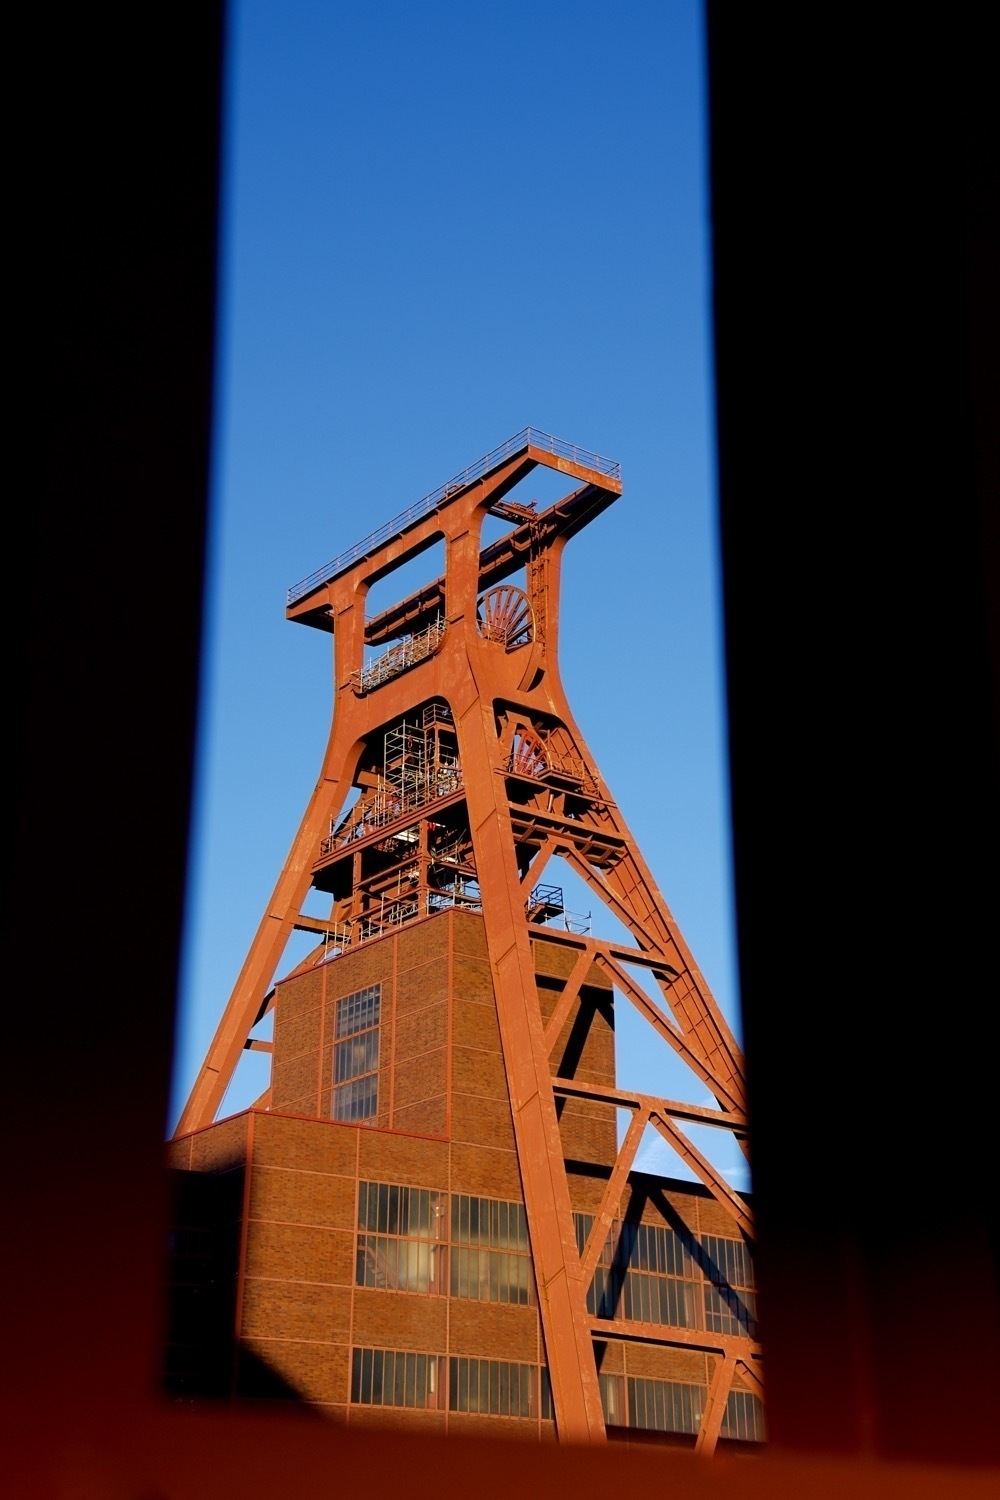 Photo of the winding tower of the Zollverein colliery, framed in a steel outline.